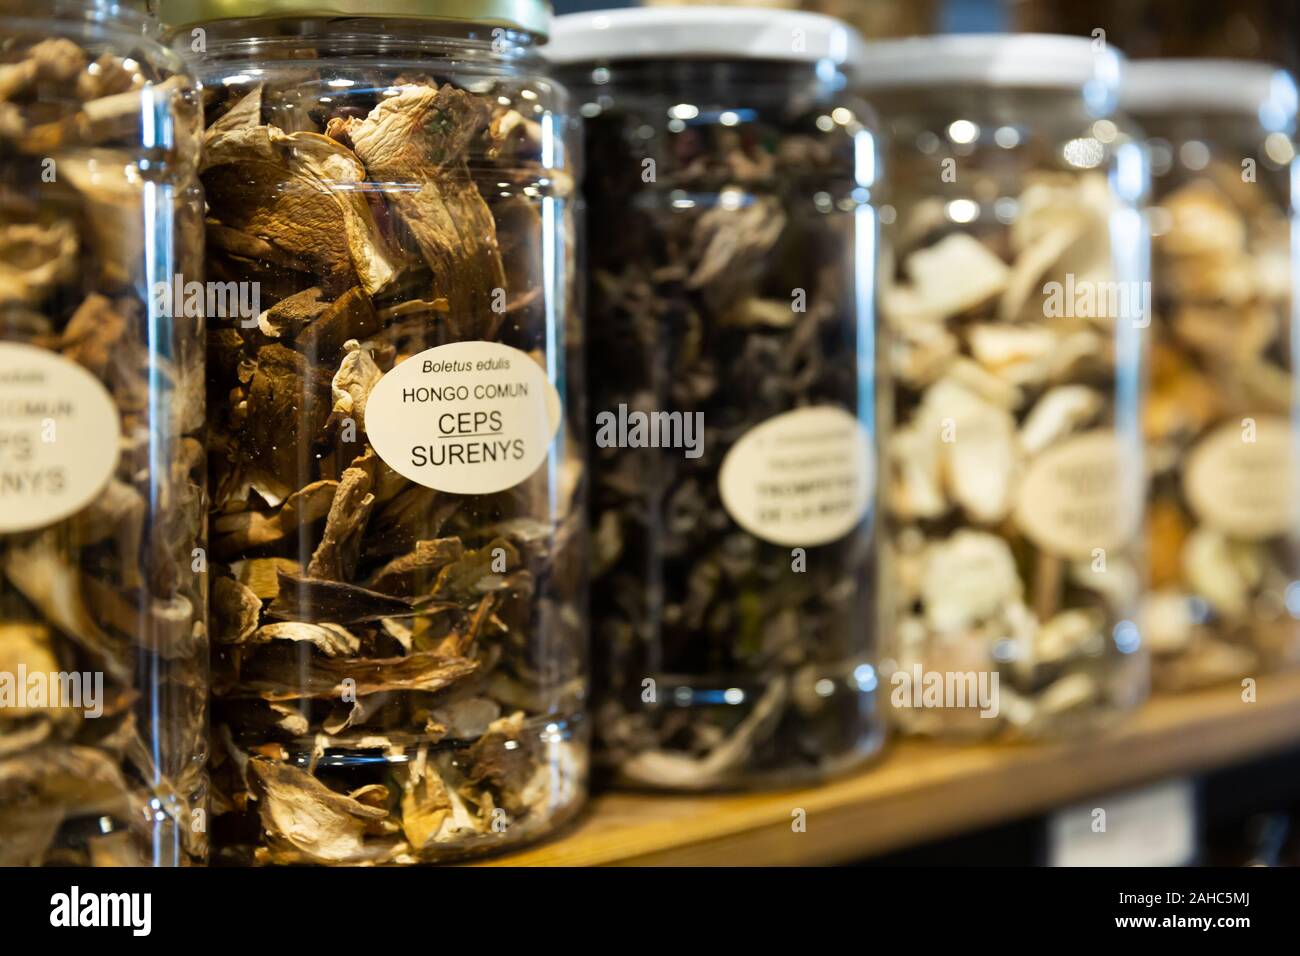 Dried red and black chanterelles, champignons, fairy-ring mushrooms in jars at grocery store counter Stock Photo